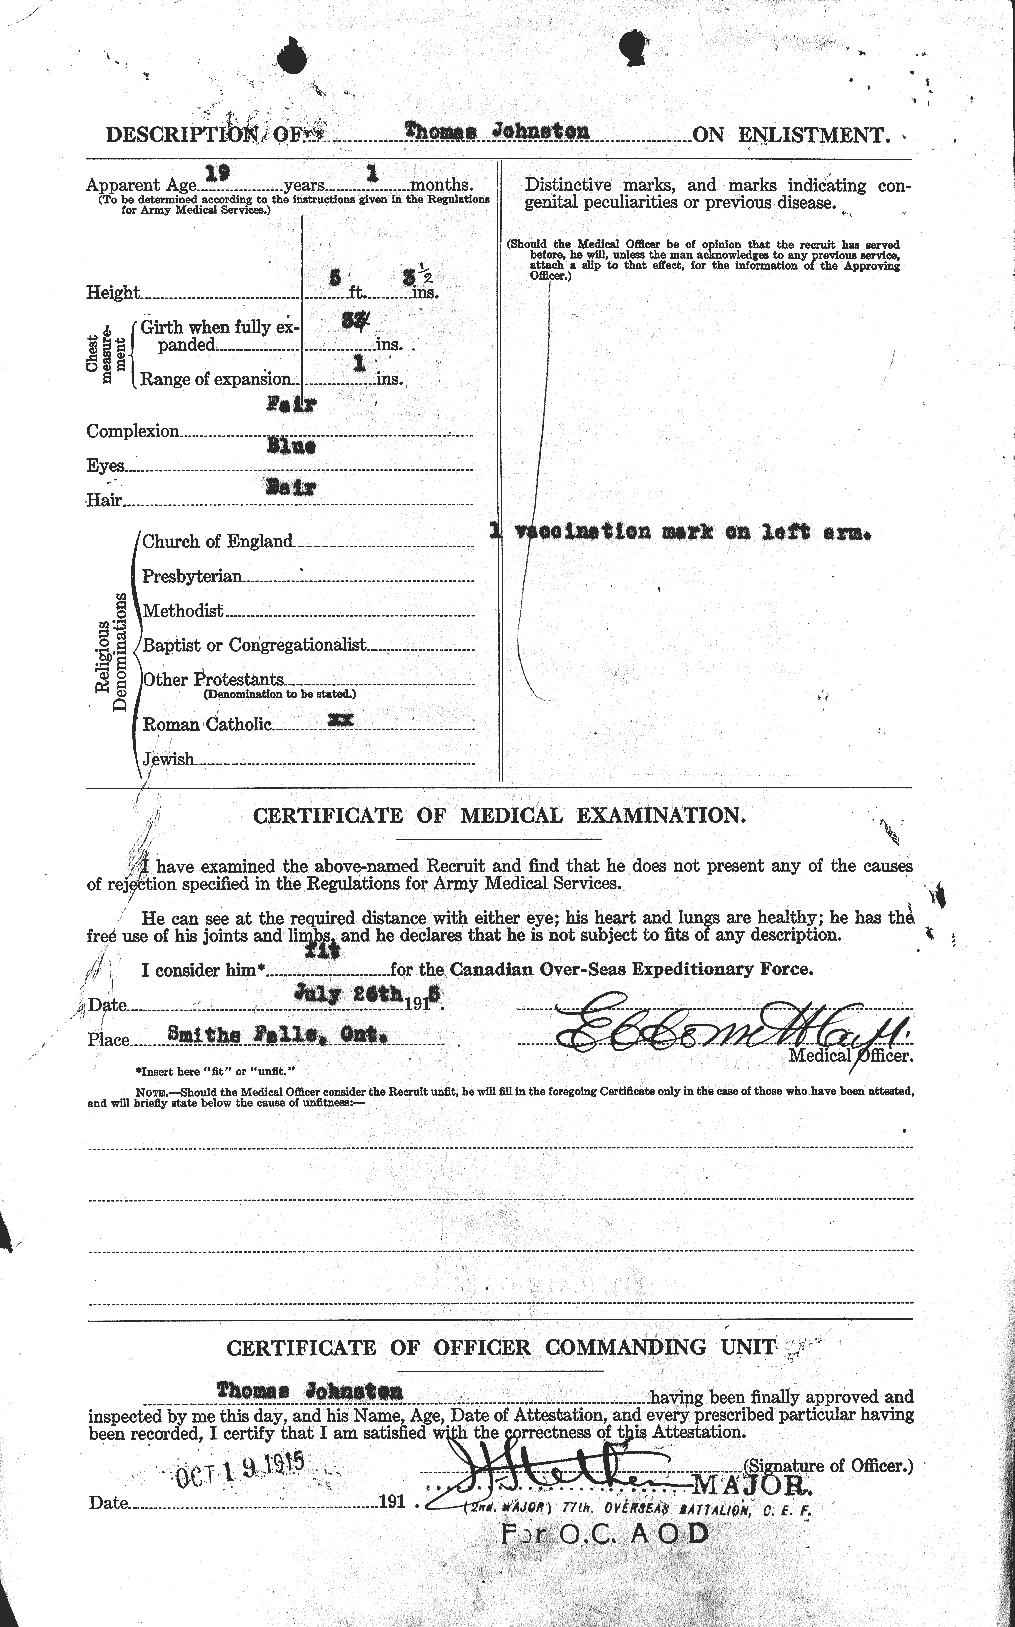 Personnel Records of the First World War - CEF 427133b